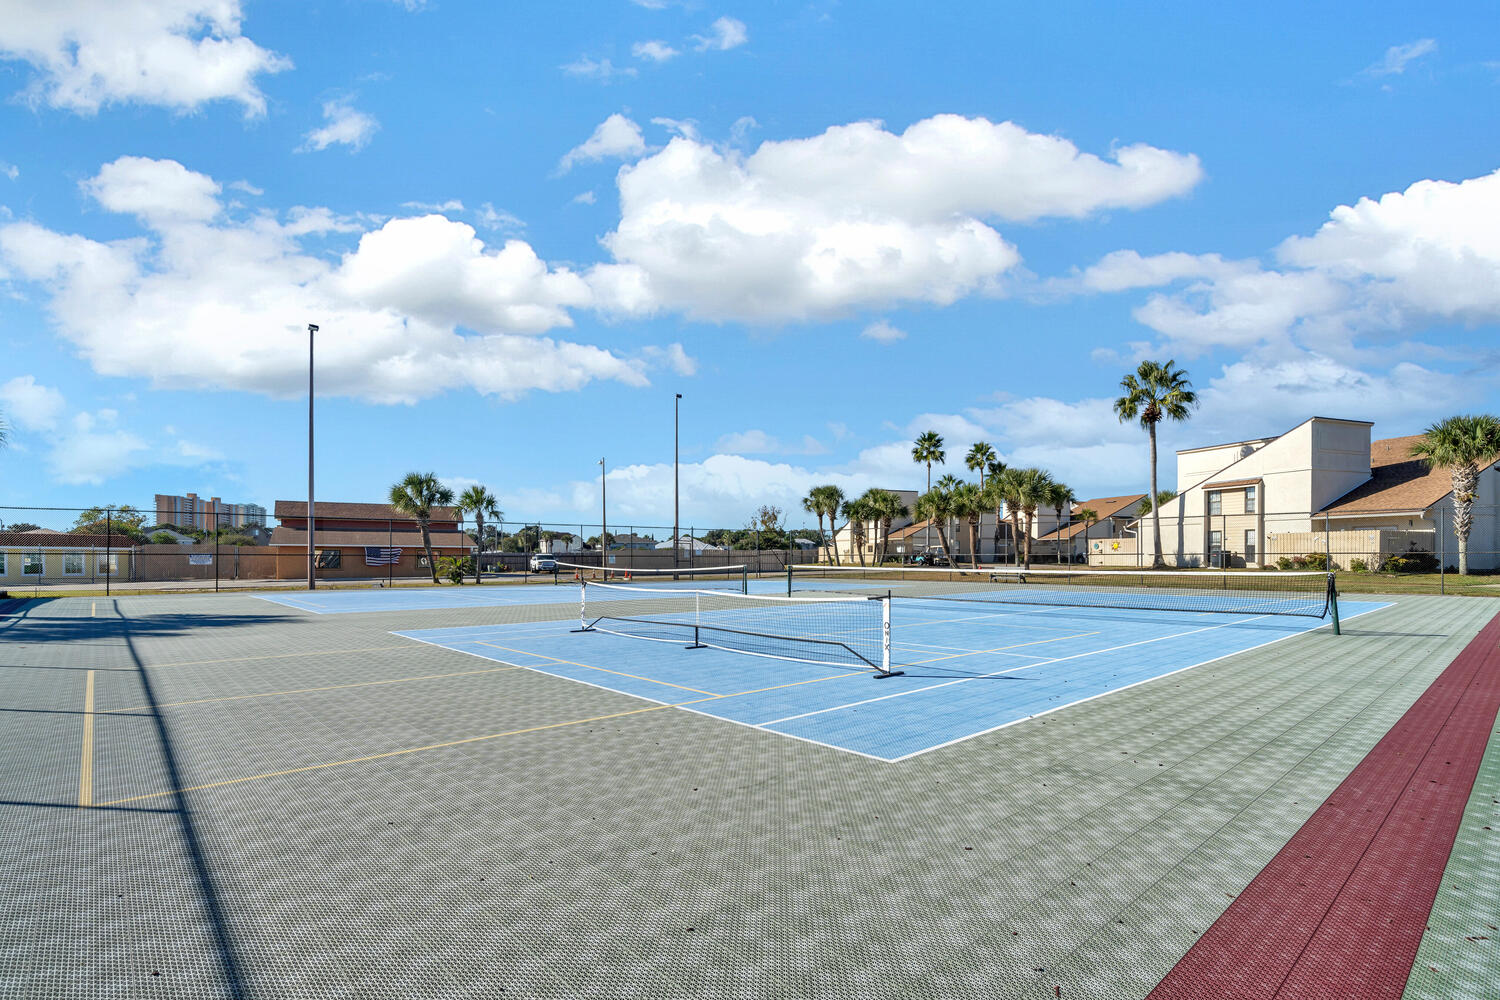 Pickleball and tennis courts